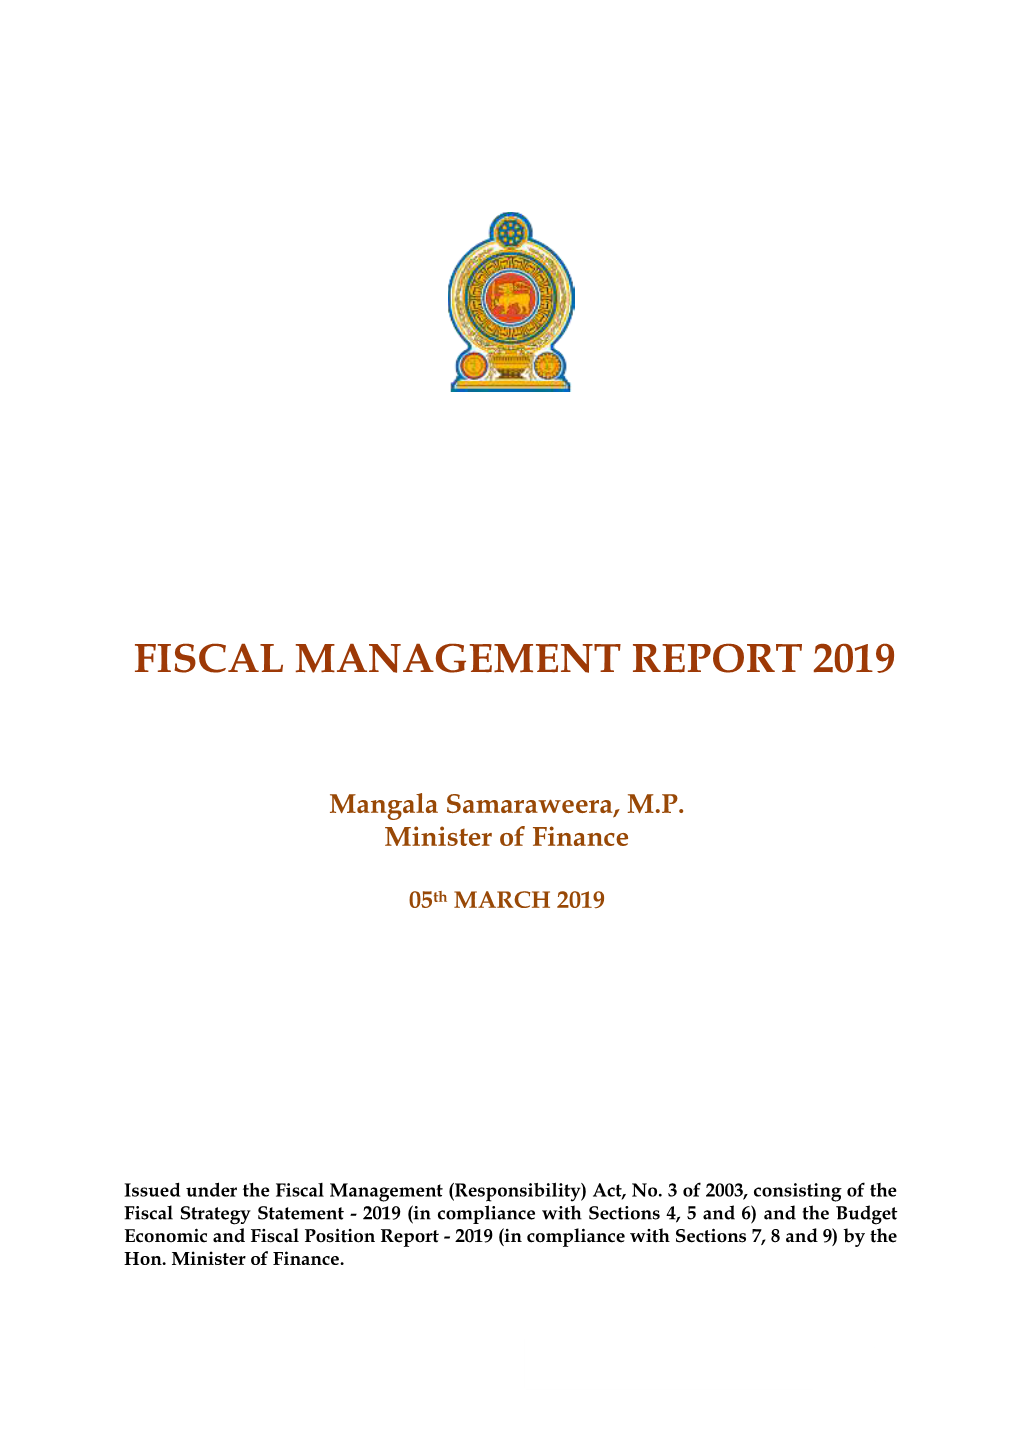 Fiscal Management Report 2019